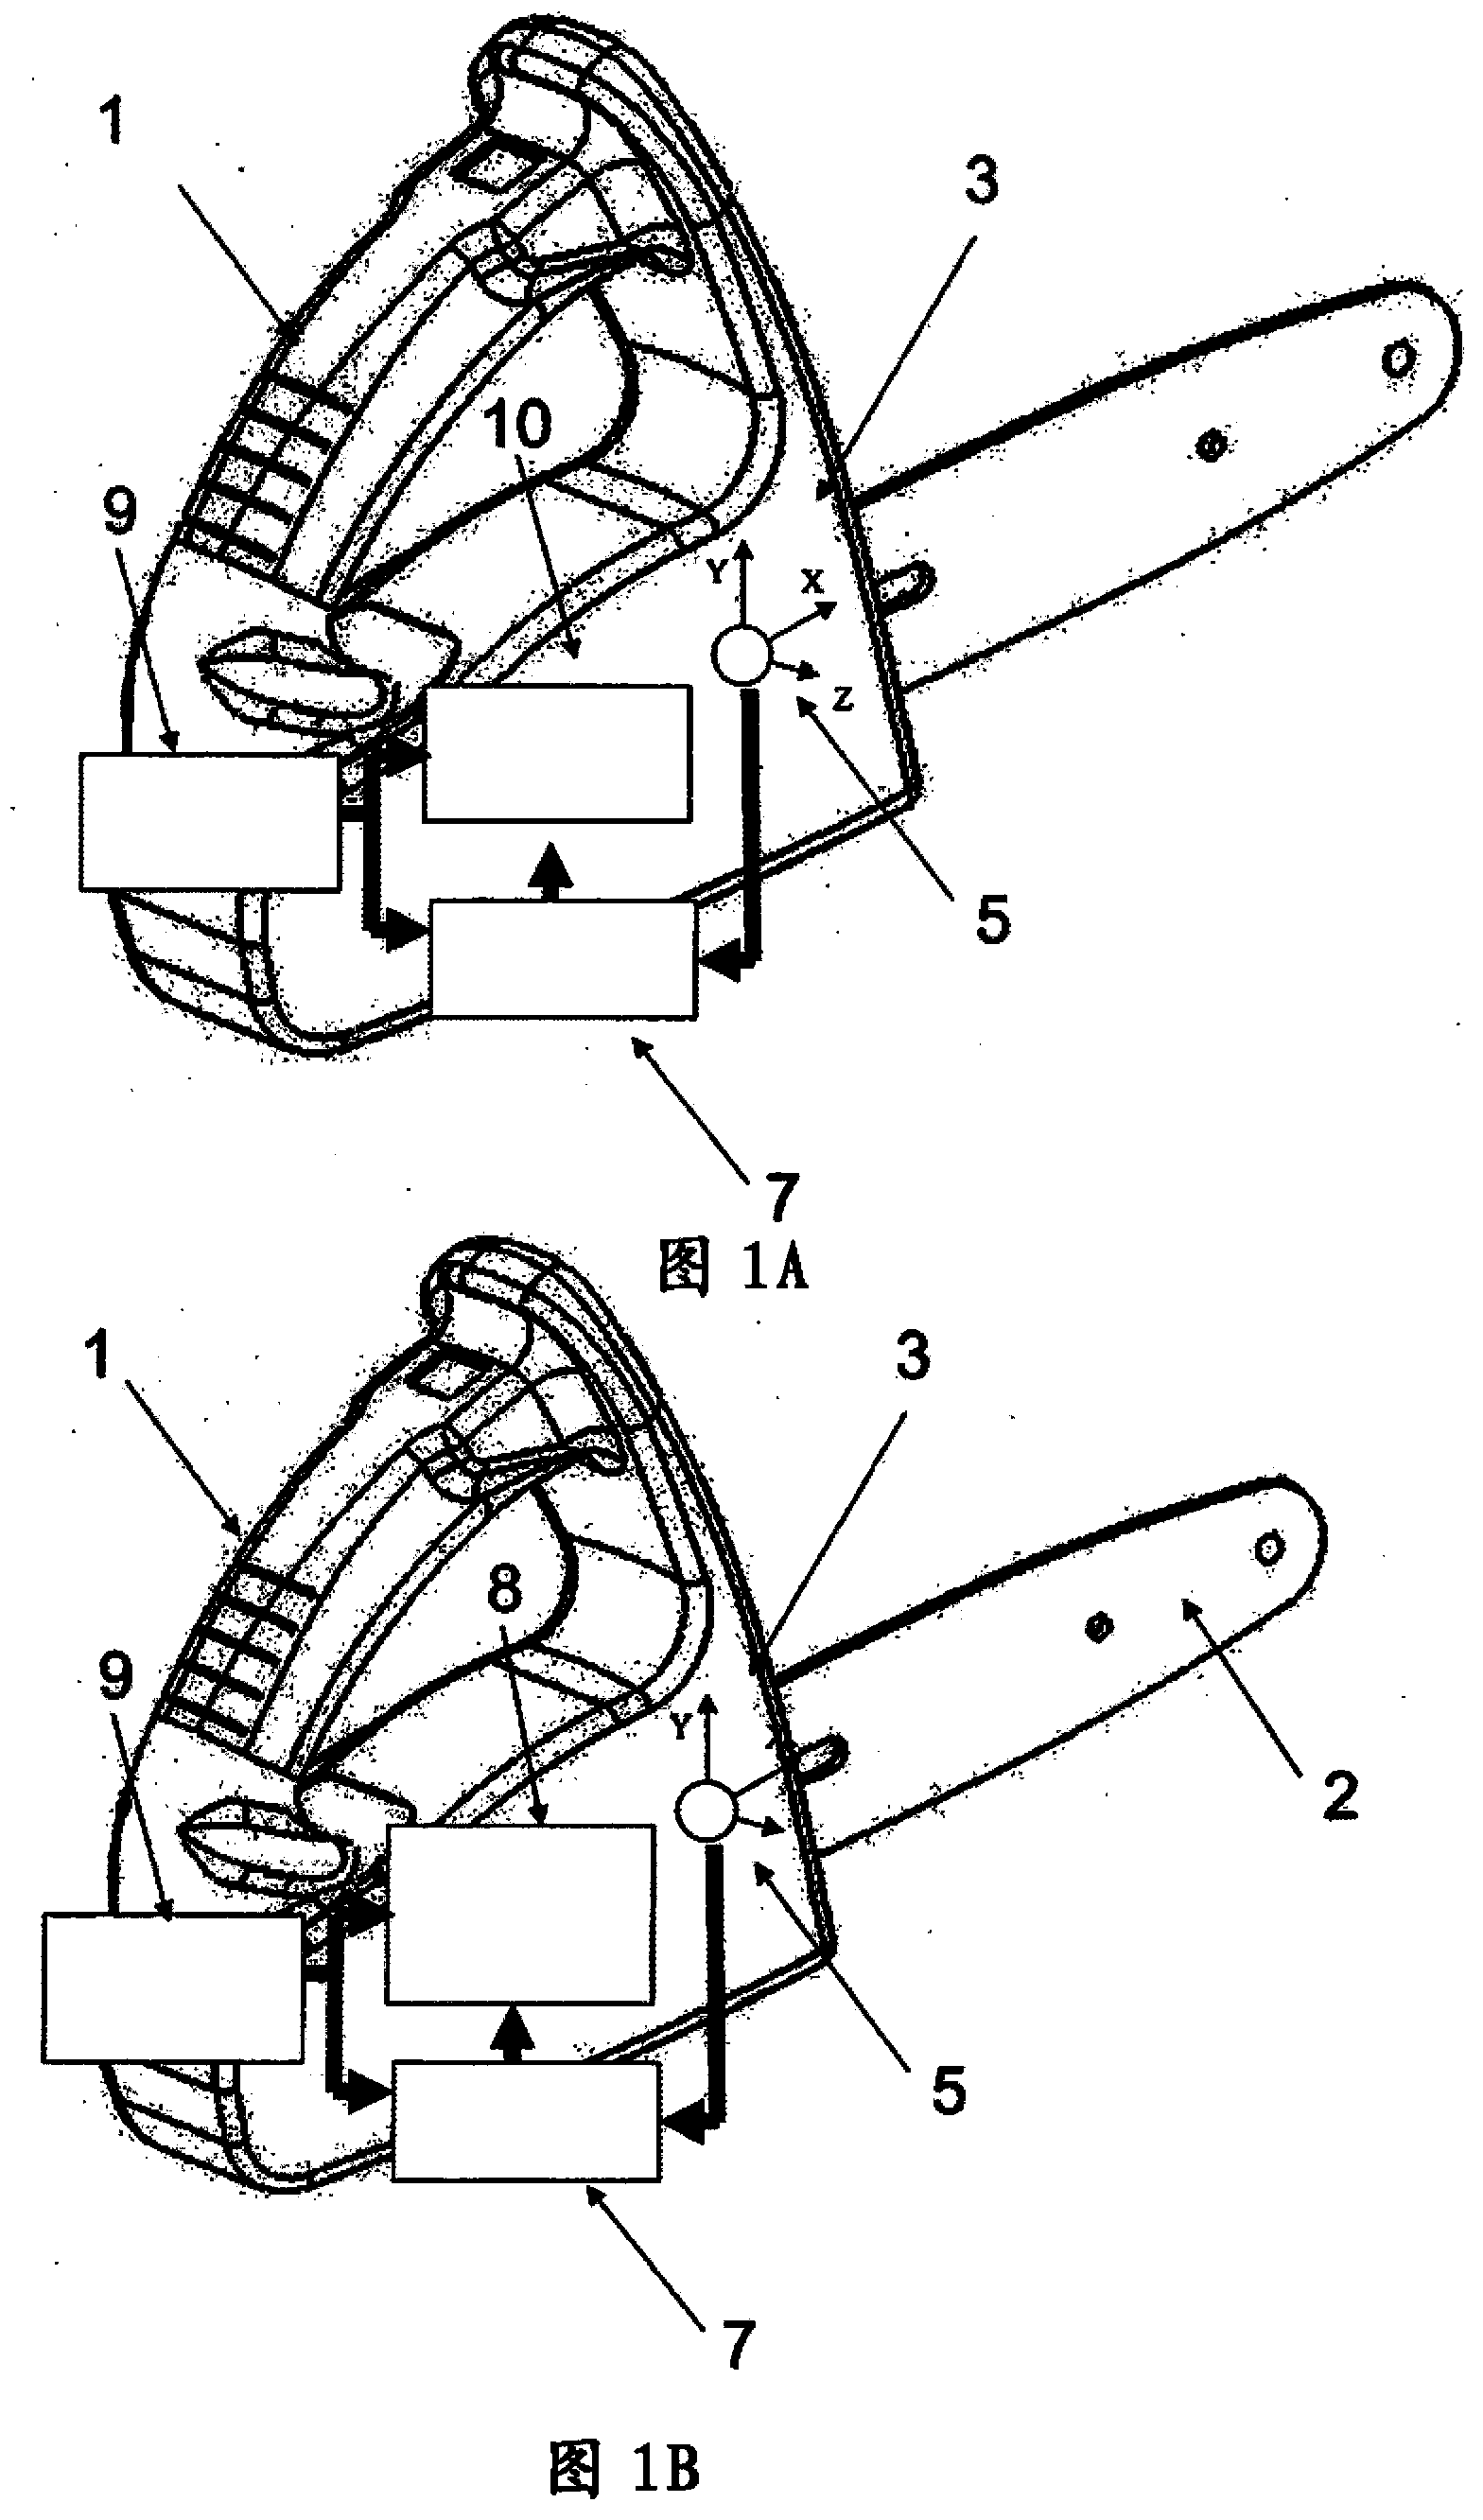 Safety device for portable tools with a heat engine, capable of stopping the operation thereof after sudden, violent movements